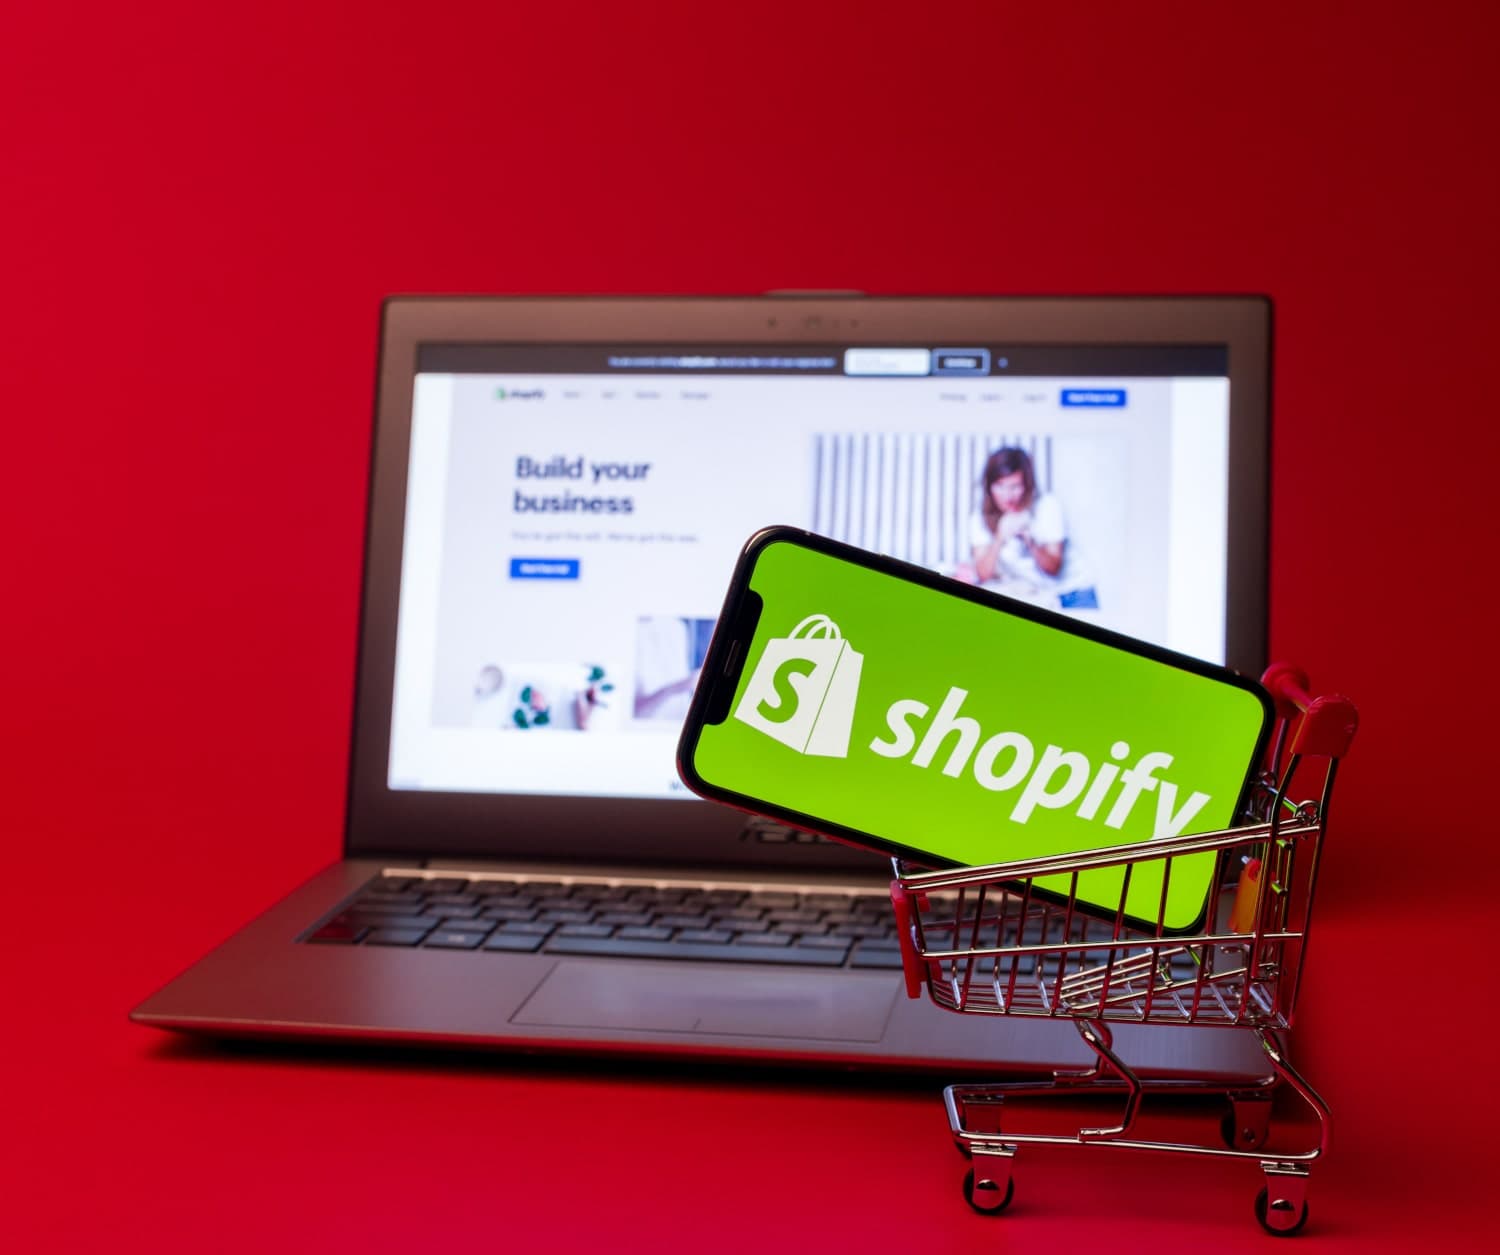 A cellphone with the Shopify logo on the screen in a toy shopping cart